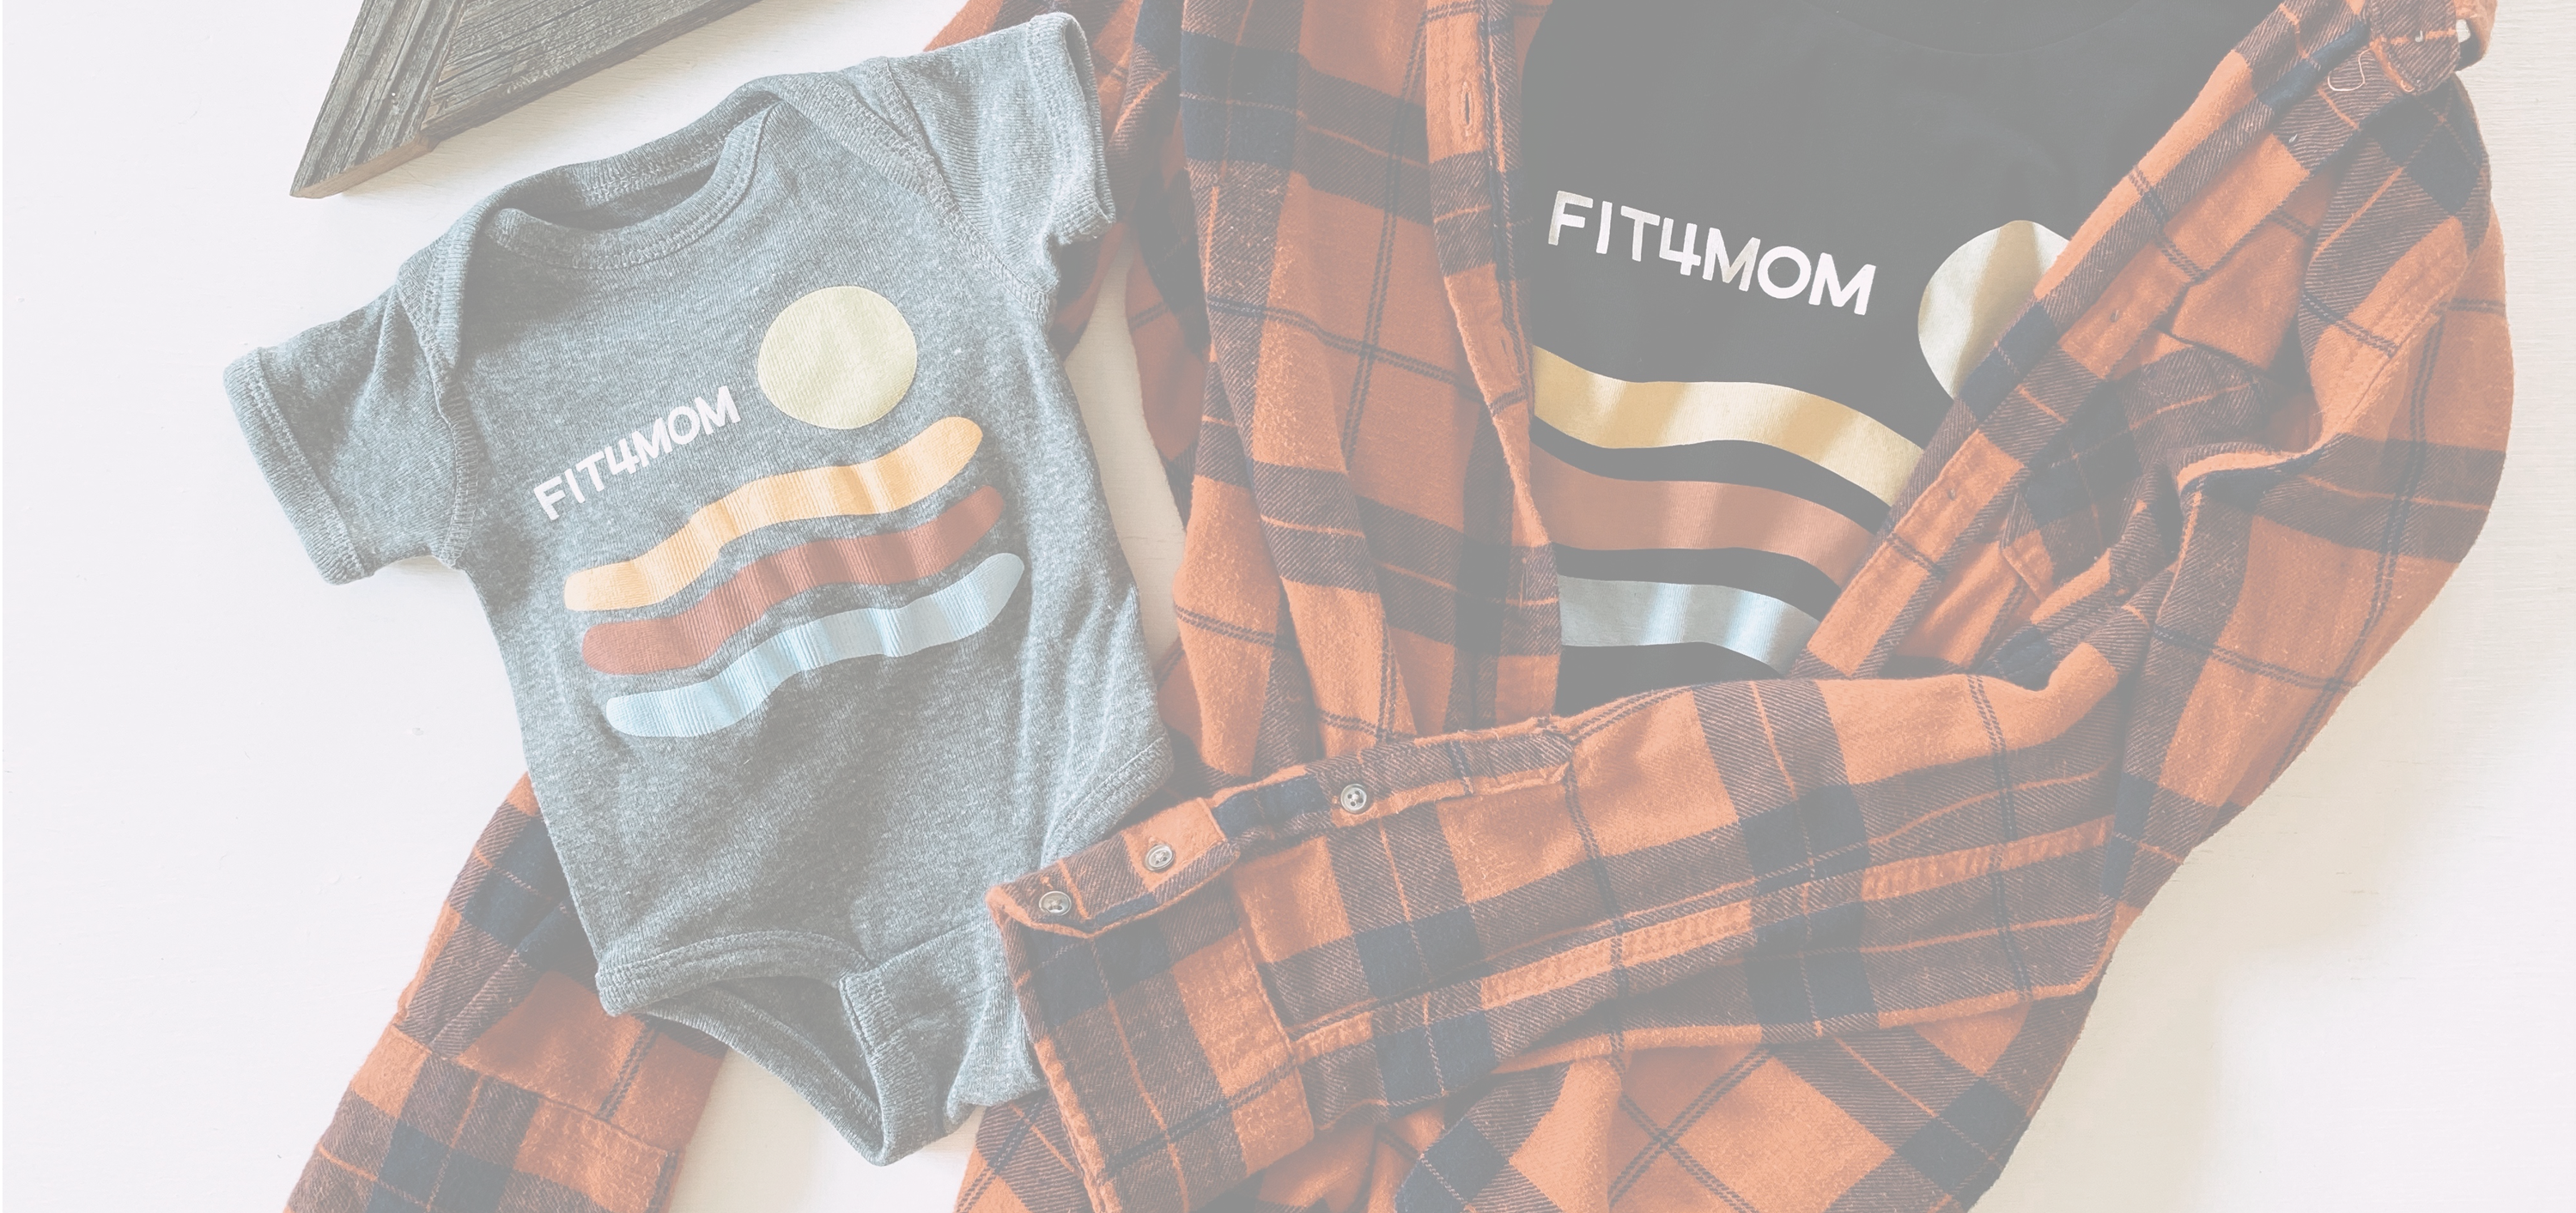 shop fit4mom